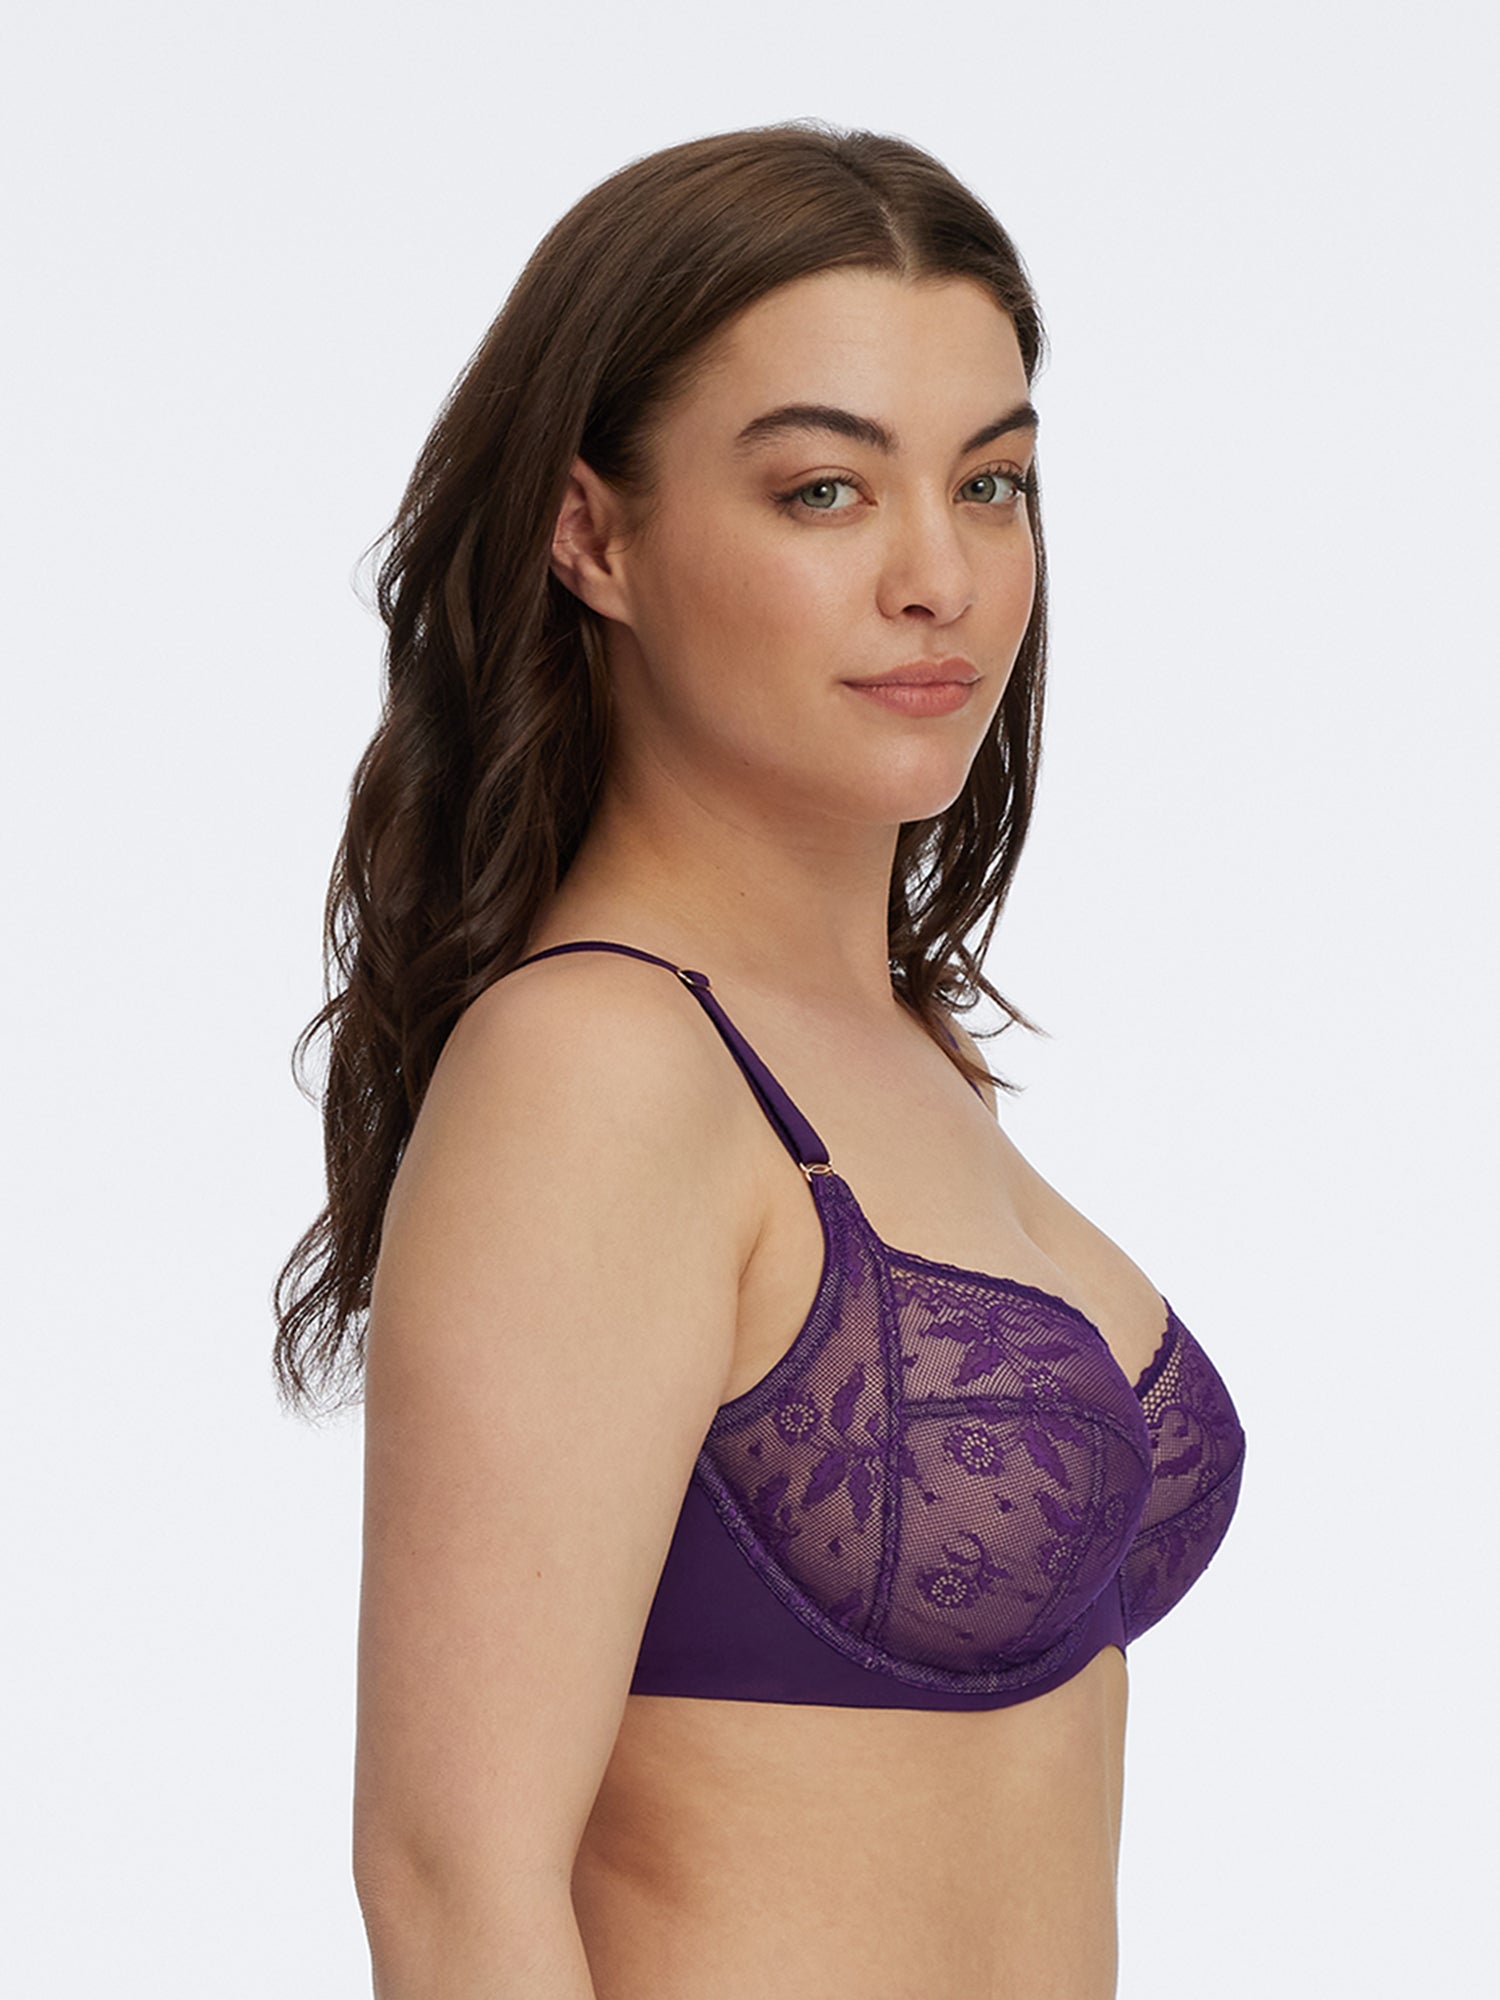 Shop Full Coverage Lace Underwire Bras for Large Breasts